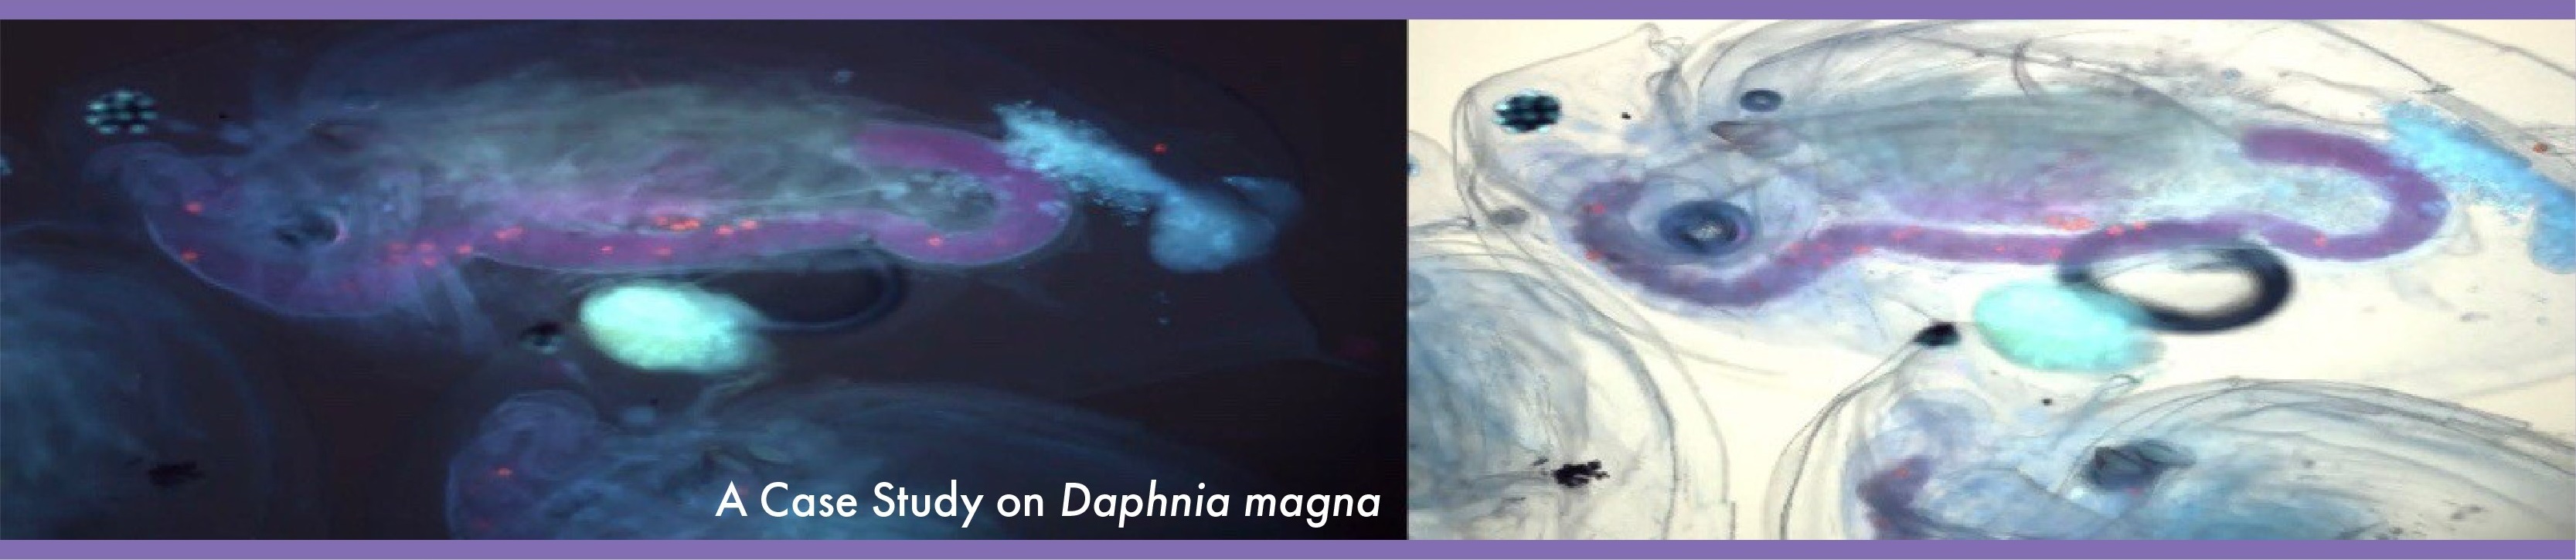 slides of Daphna magna viewed under a microscope